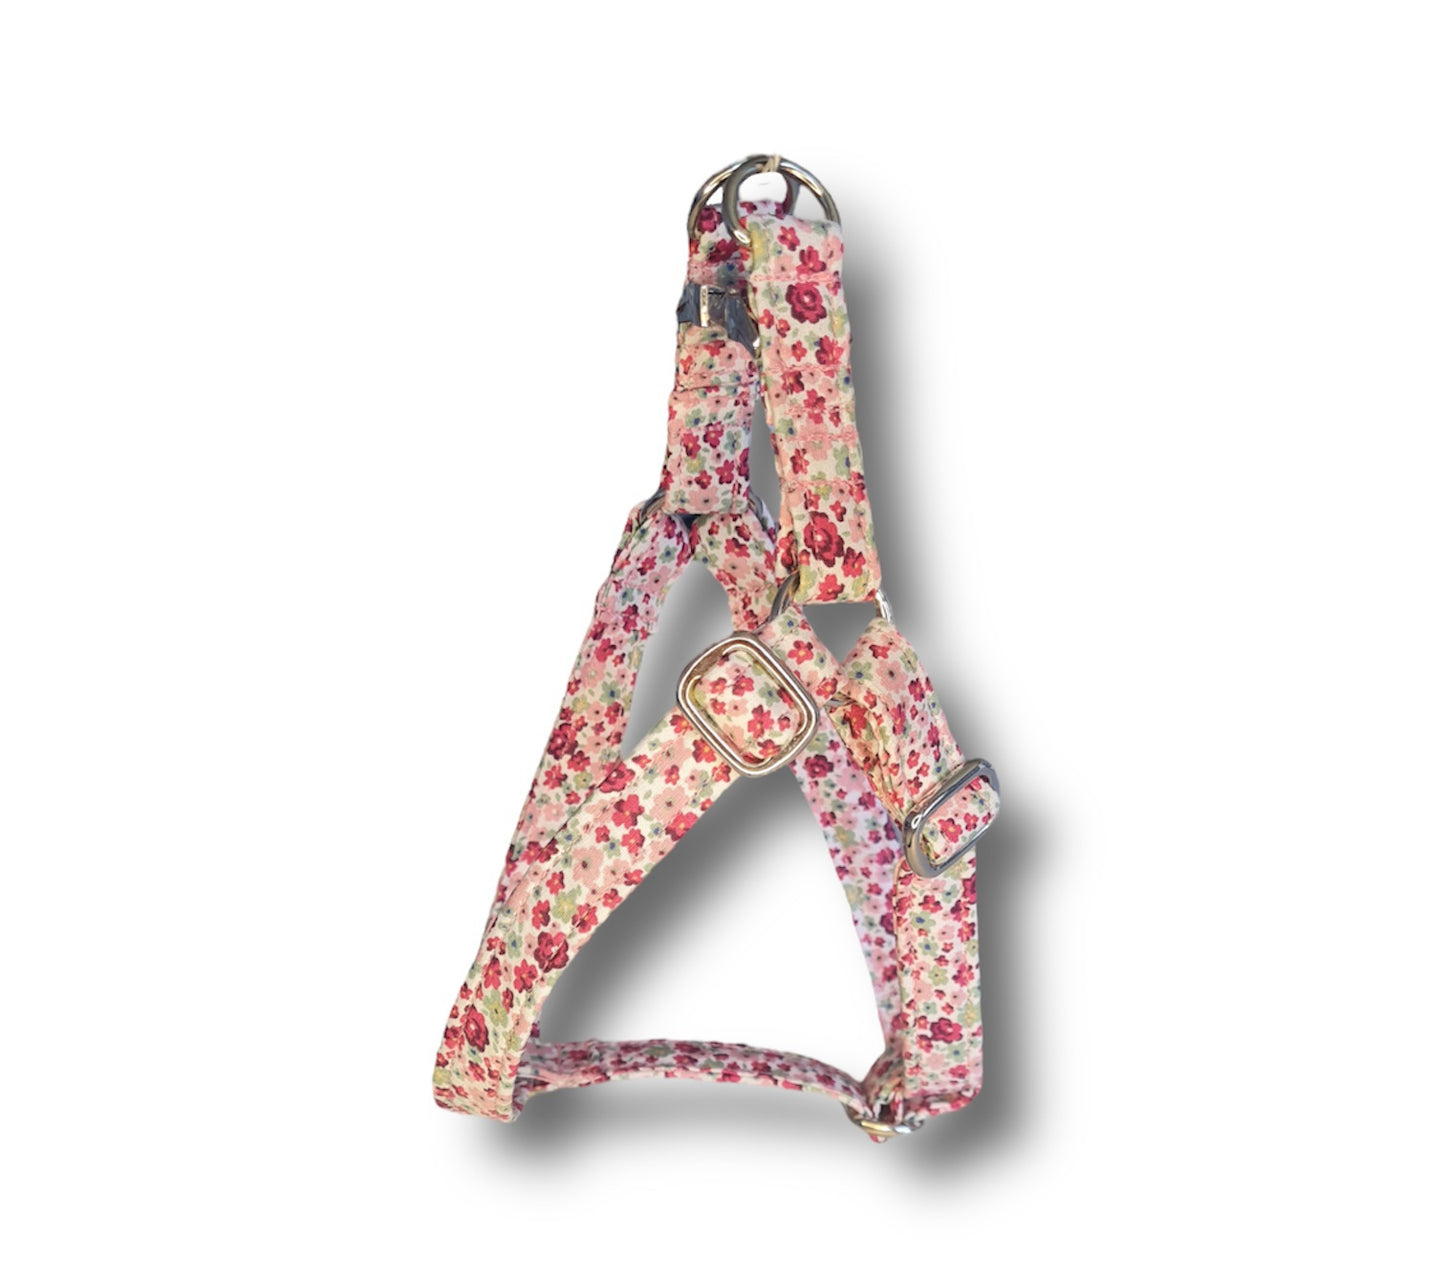 Adjustable step in dog harness - Pink ditsy